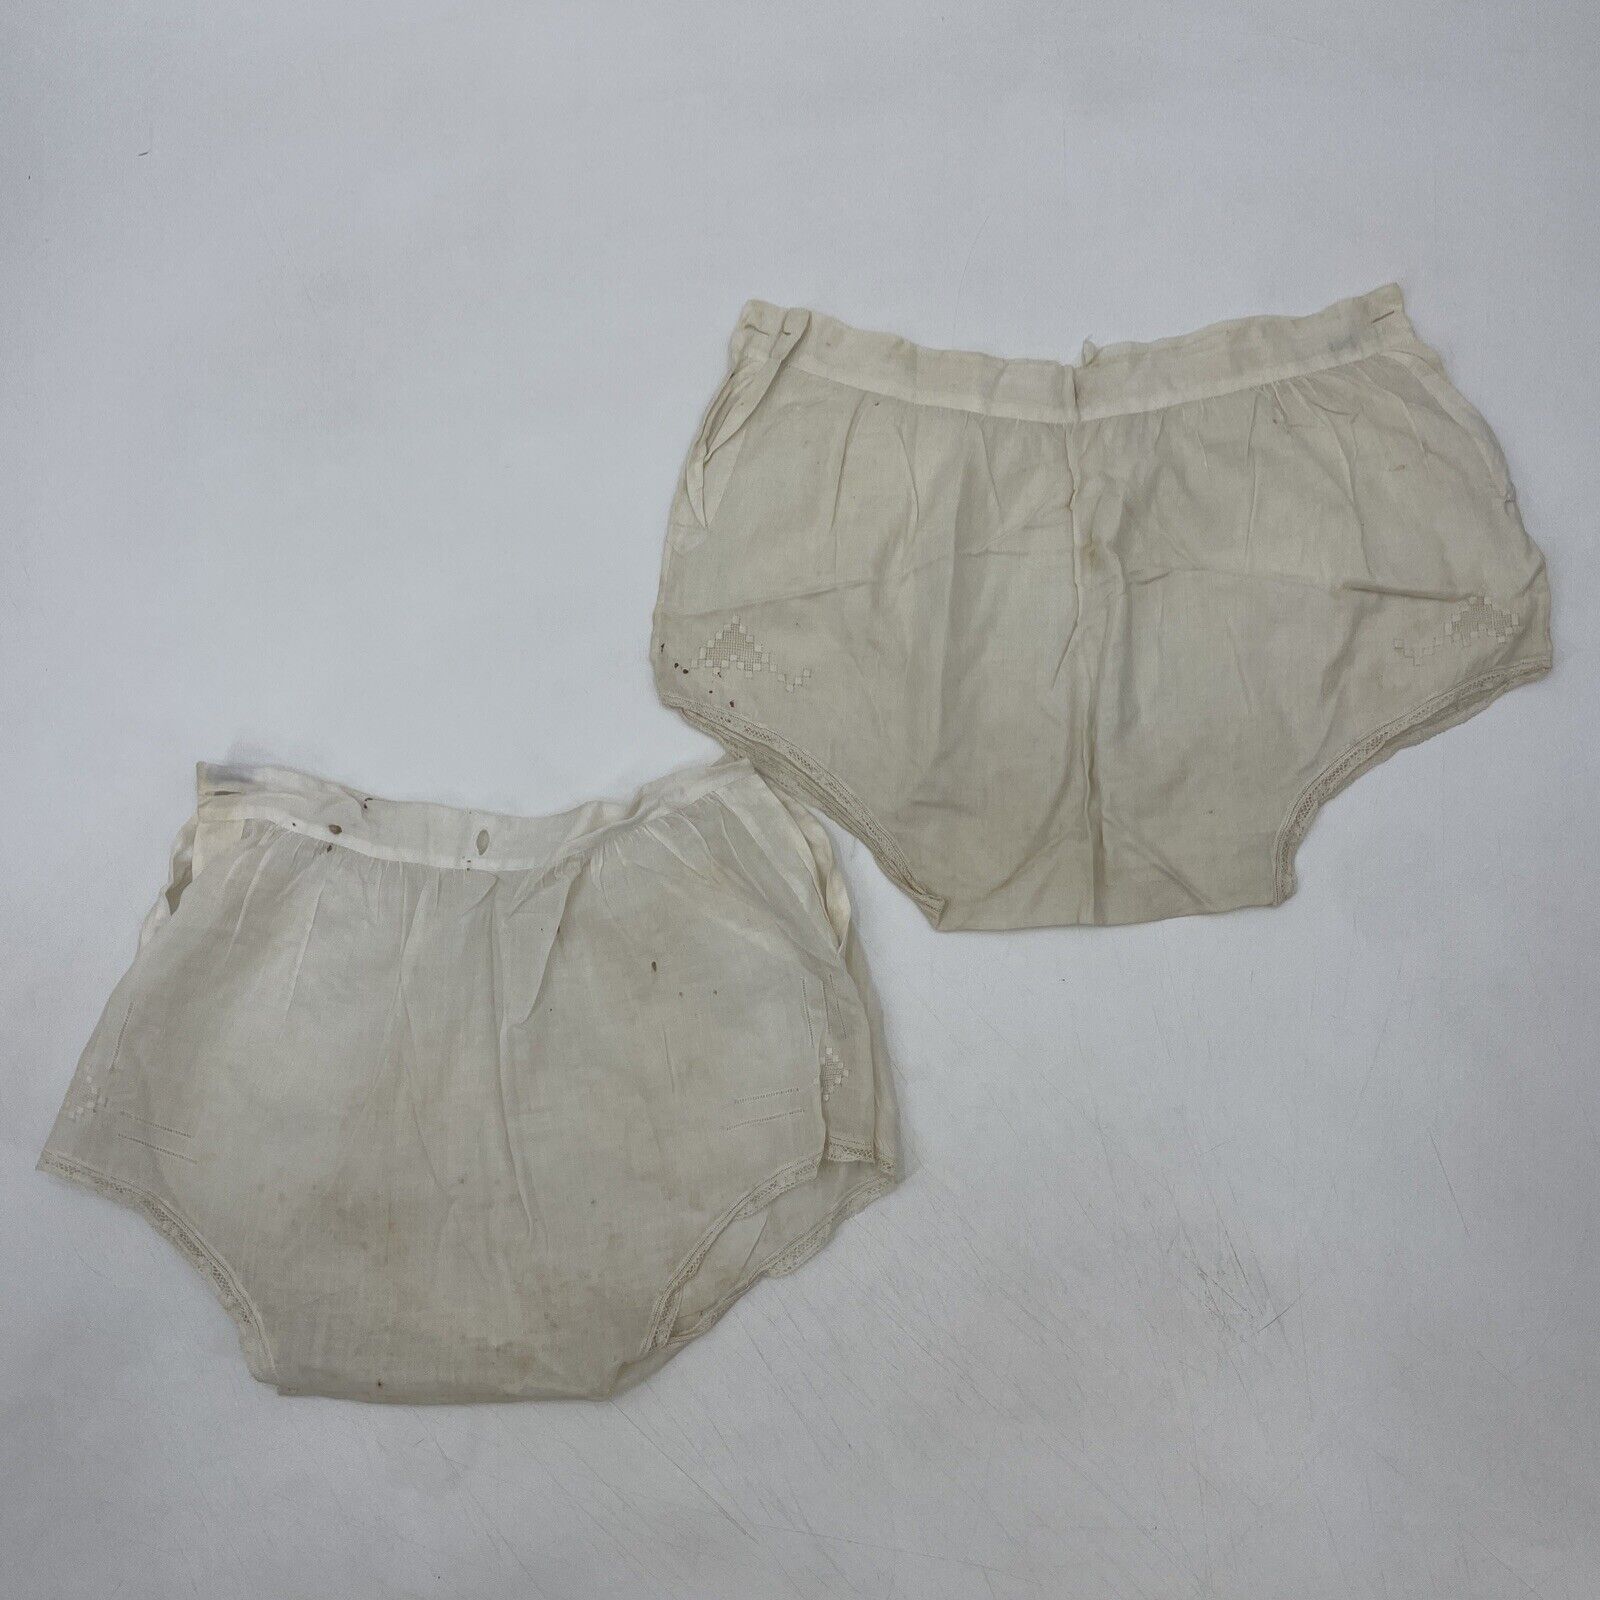 2 Vintage Antique Baby Toddler Diaper Covers Franklin Simon ￼ Bloomers France￼￼